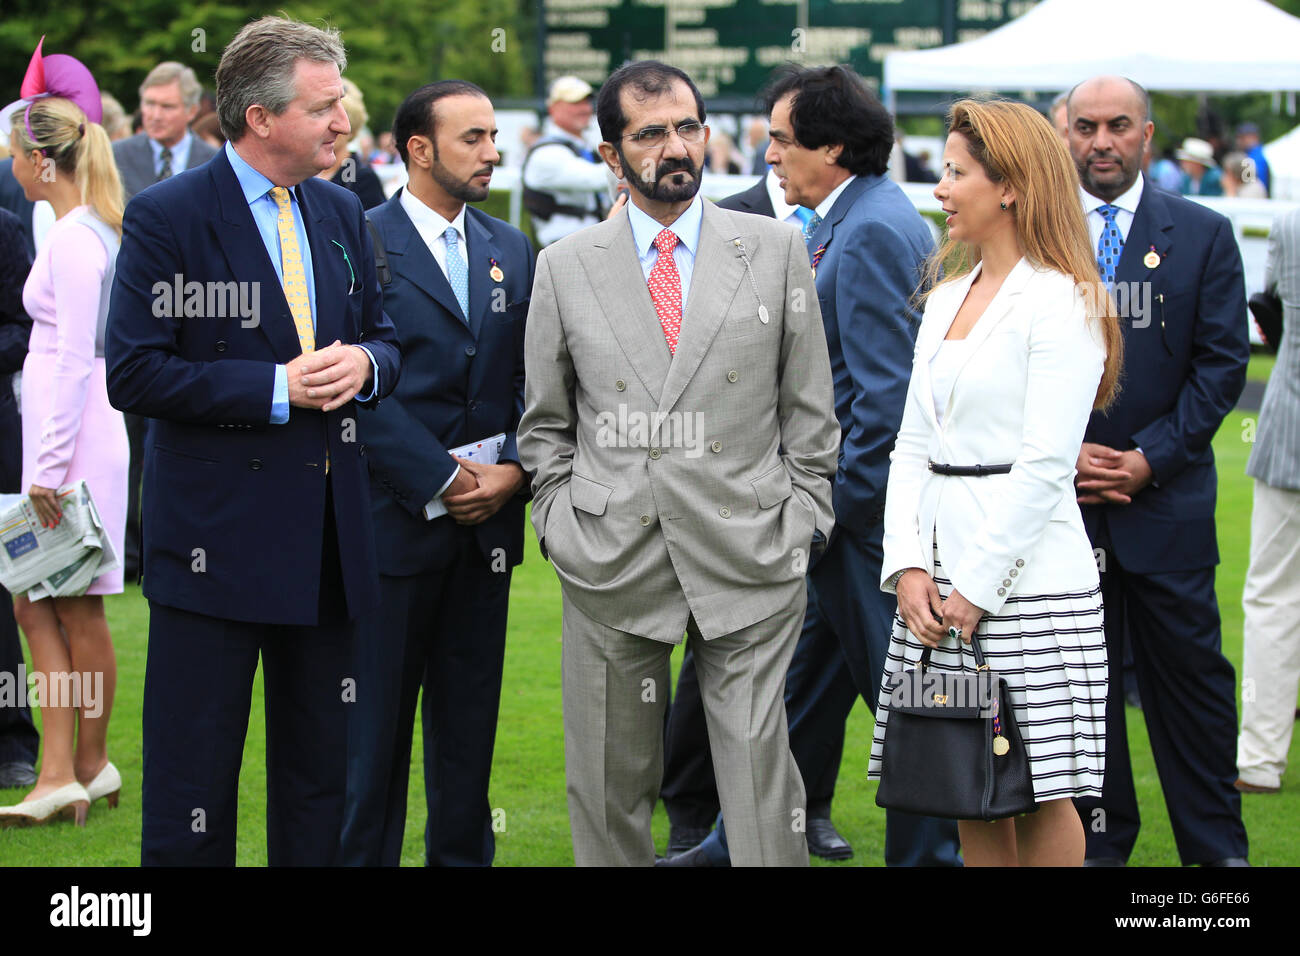 Horse Racing - 2013 Glorious Goodwood Festival - QIPCO Sussex Stakes Day - Goodwood Racecourse. Owner Sheikh Mohammed bin Rashed al-Maktoum speaks with his wife Princess Haya bint Al Hussein Stock Photo